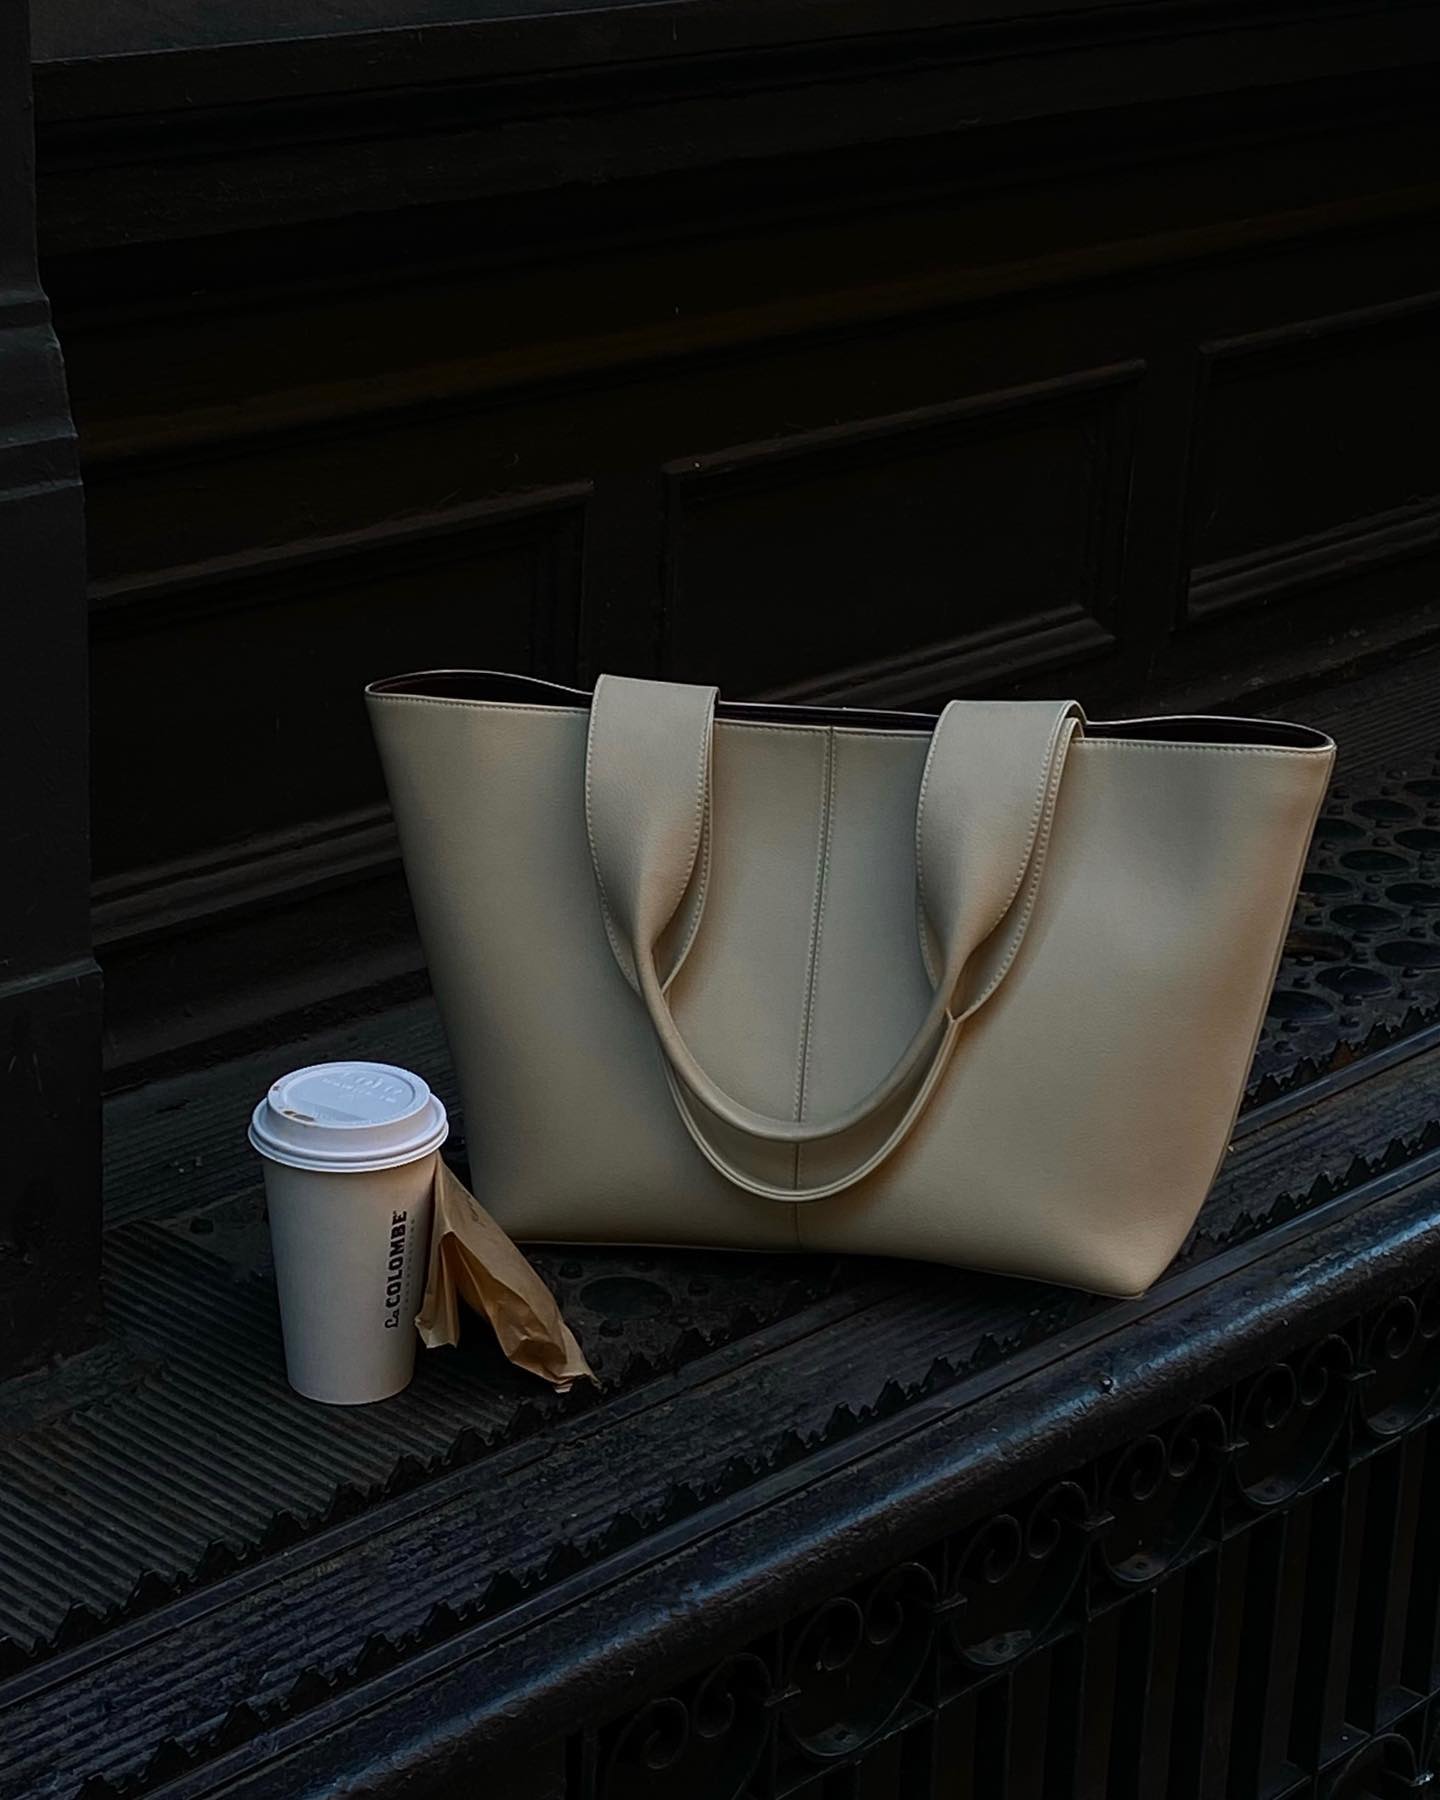 Off-white Freja NYC oversize tote bag with coffee cup sitting on dark brown park bench.